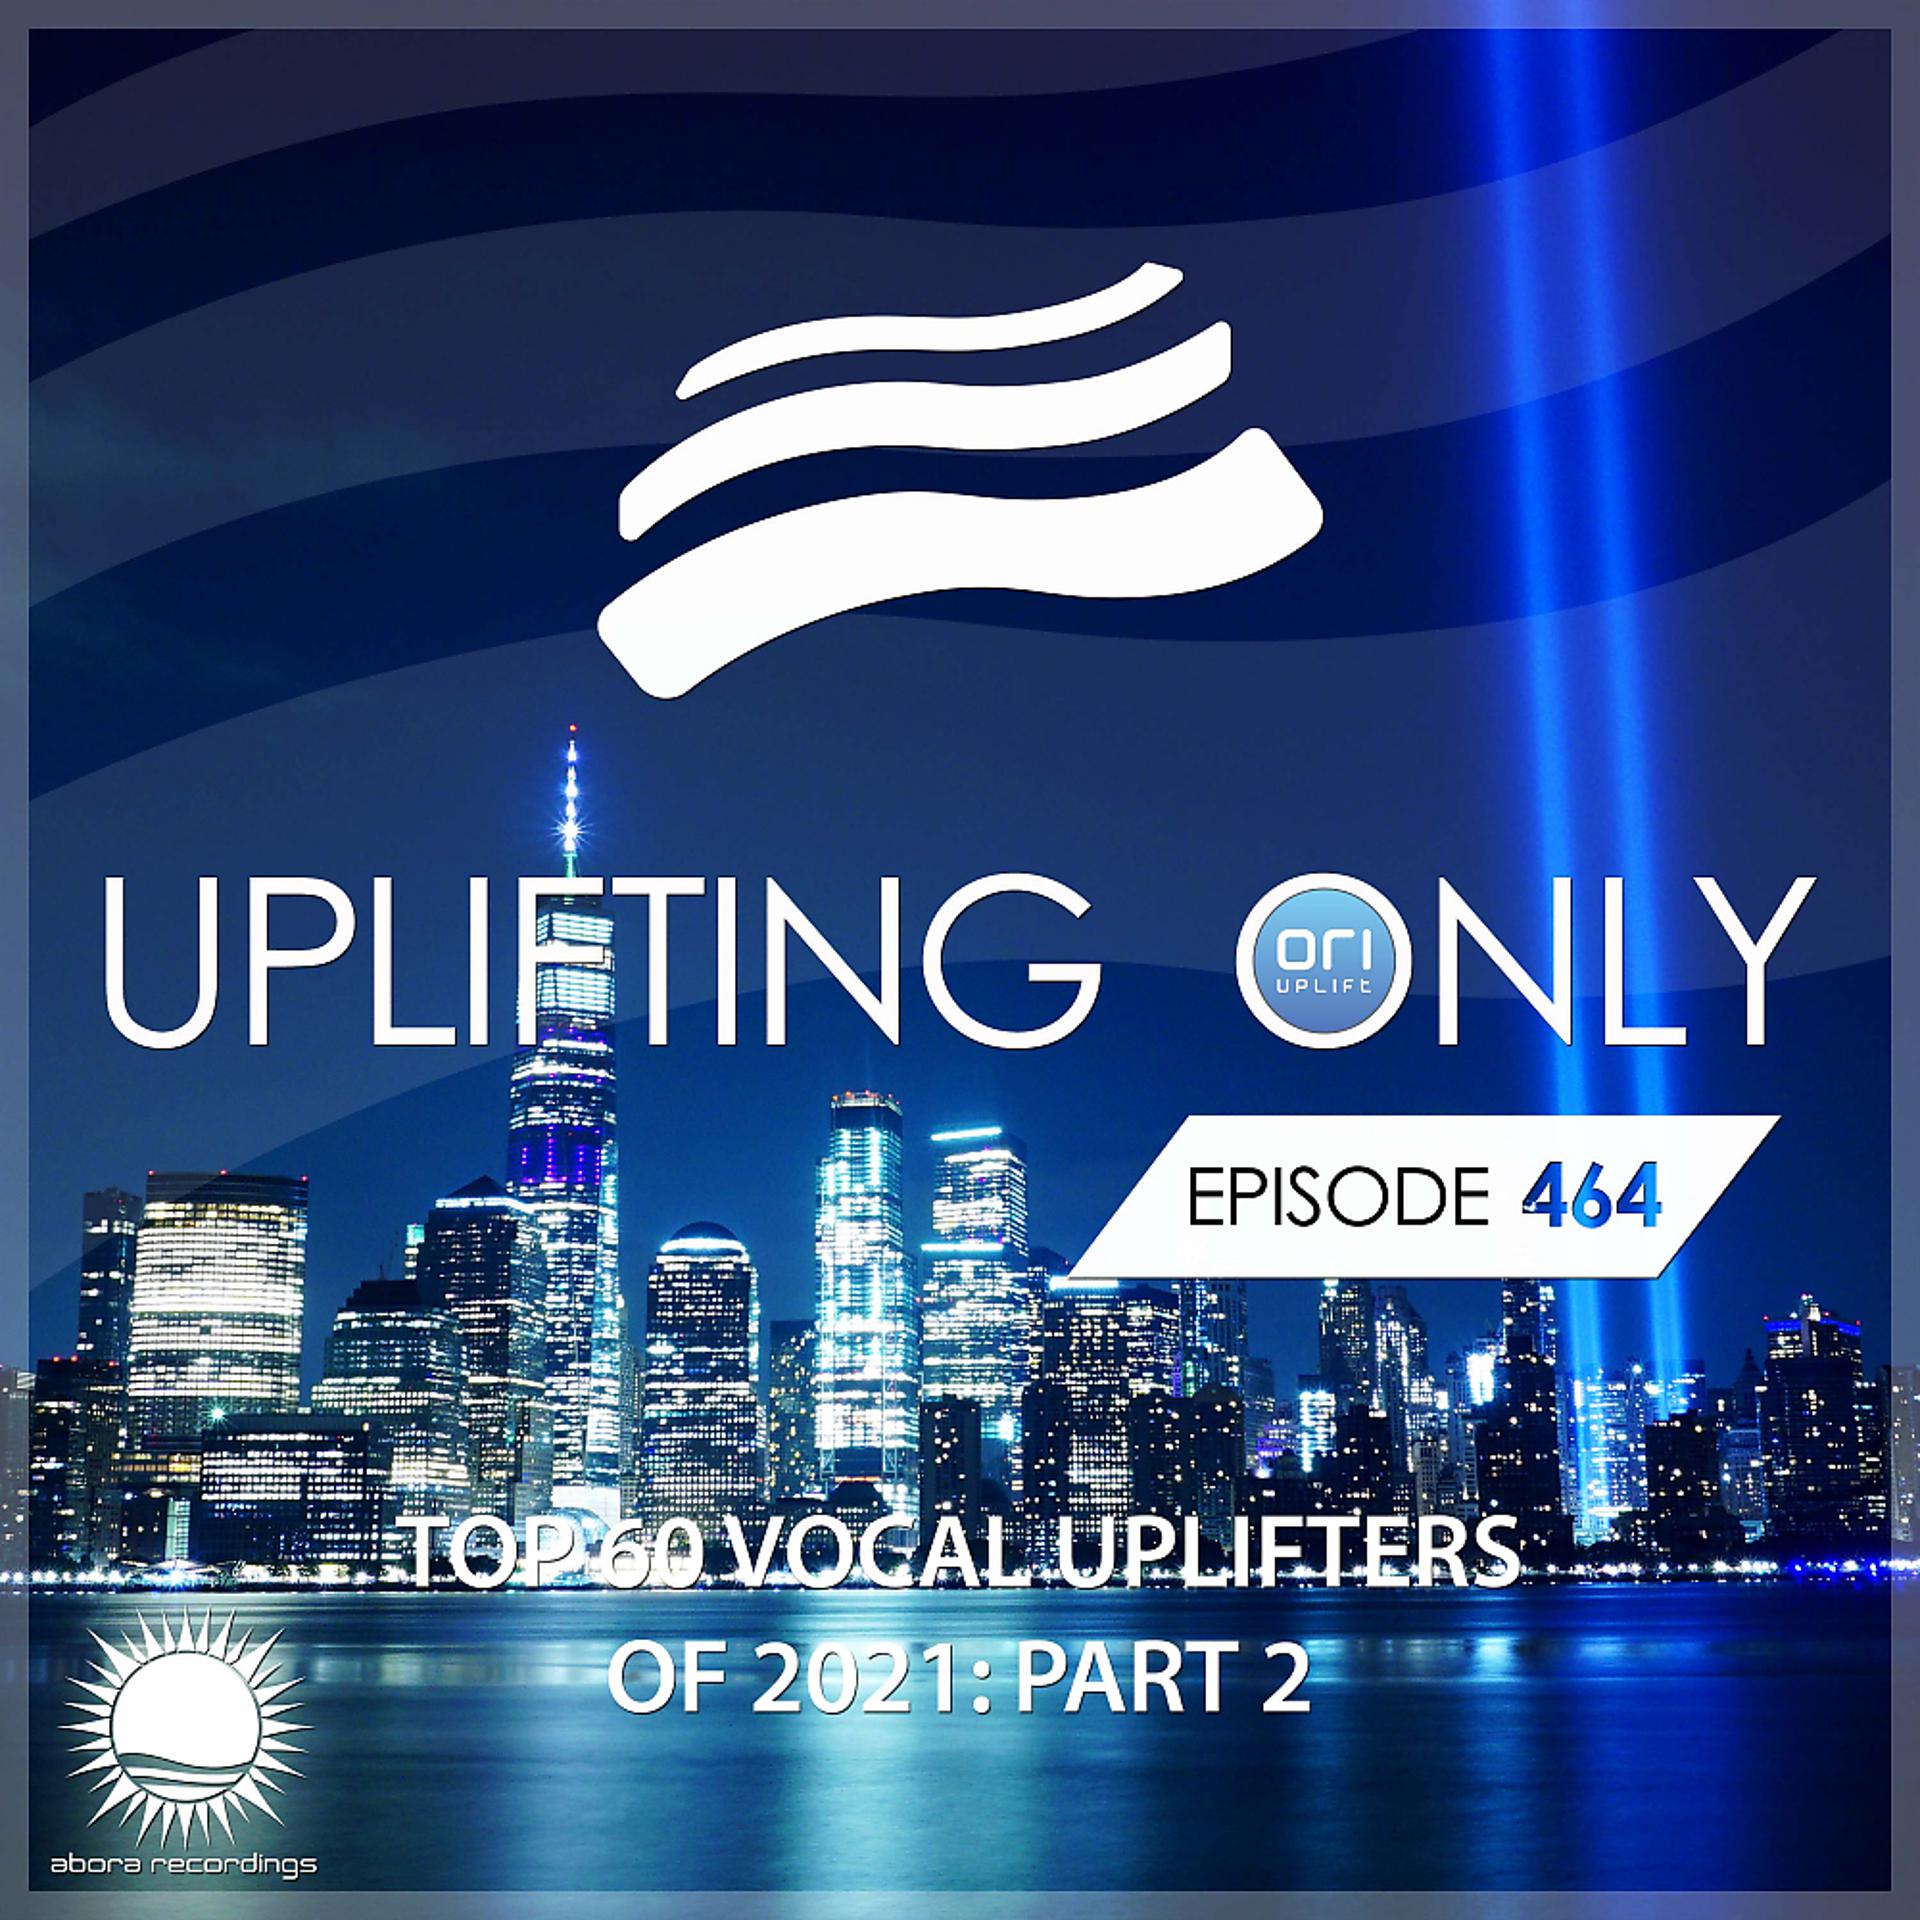 Постер альбома Uplifting Only 464: No-Talking DJ Mix: Ori's Top 60 Vocal Uplifters of 2021 - Part 2